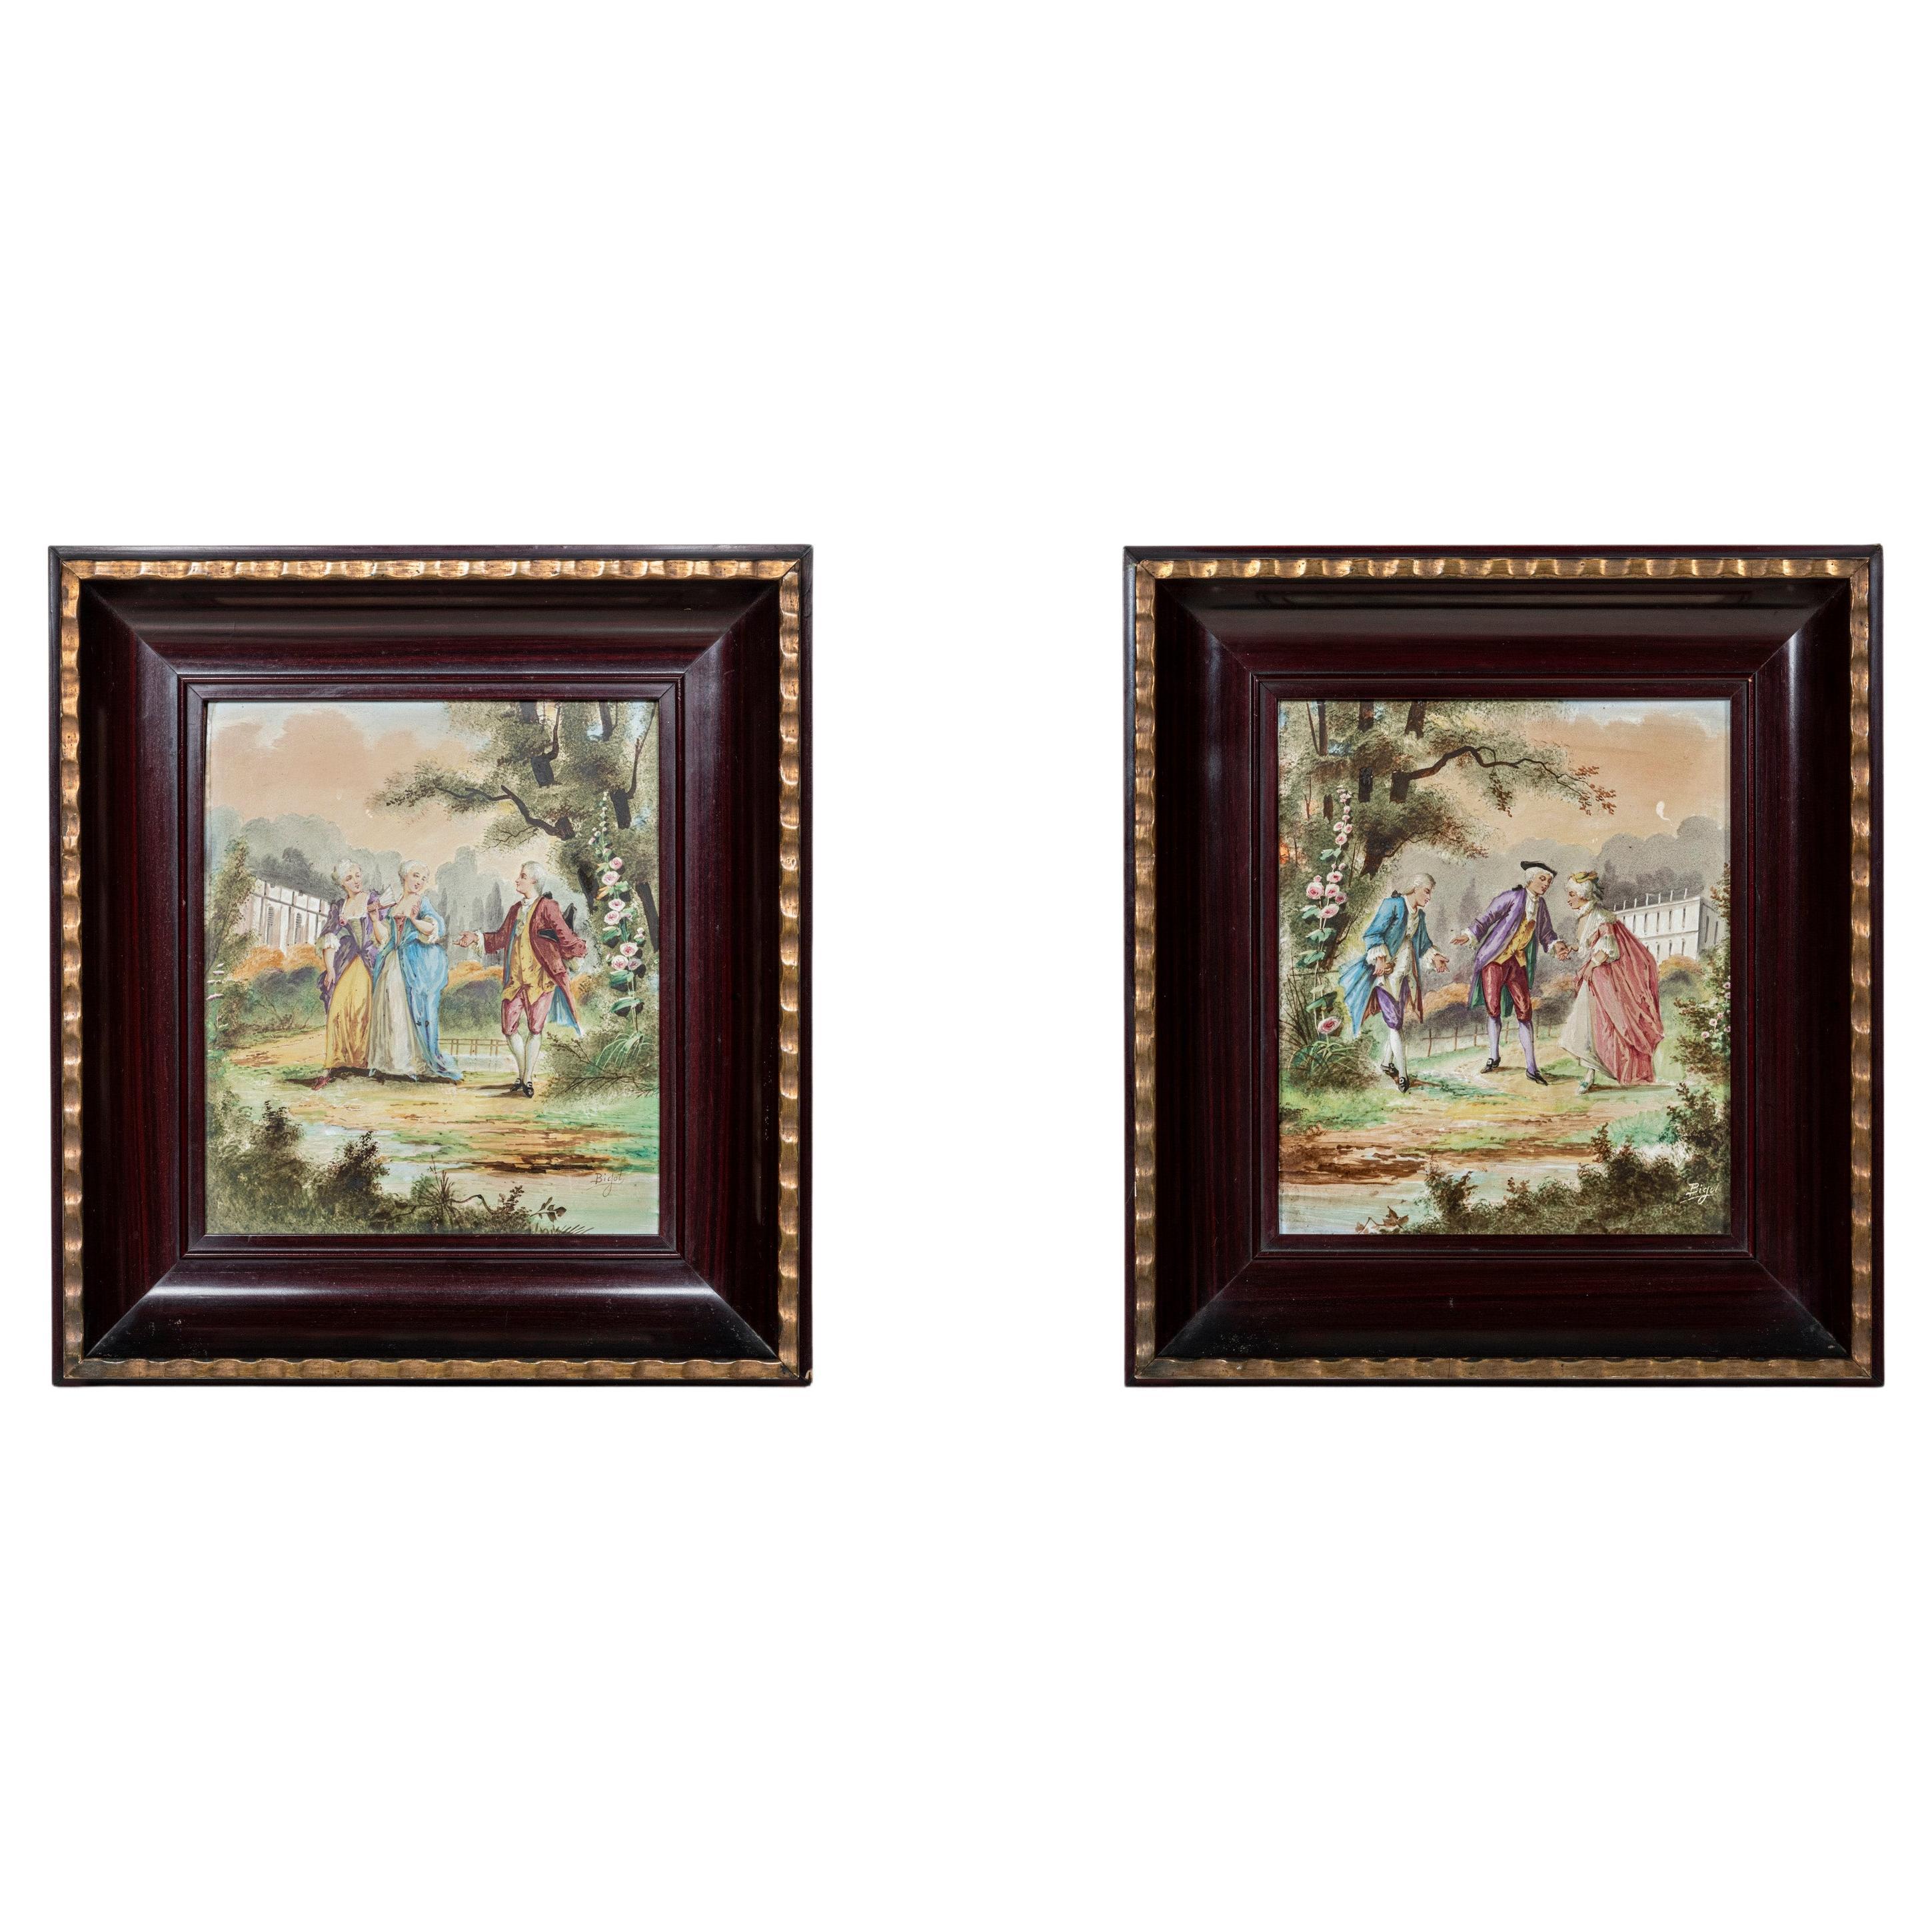 Pair of painted porcelain plaques signed Bigot, France, late 19th century.